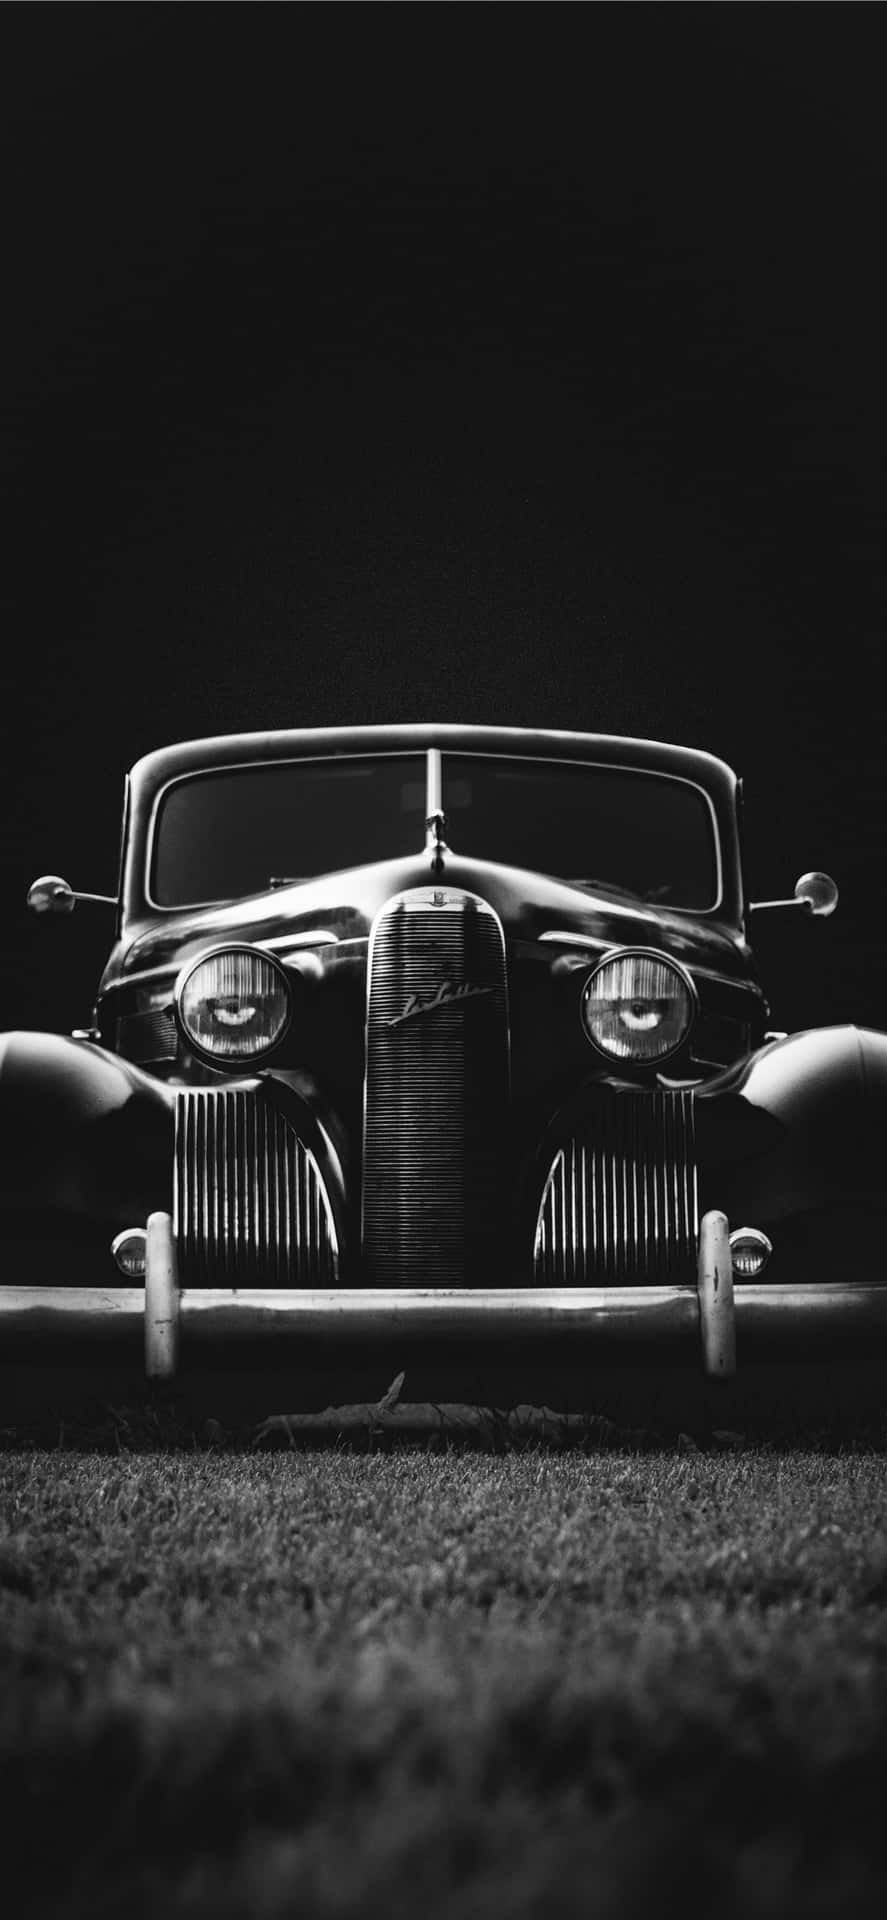 A Black And White Photograph Of An Old Car Wallpaper